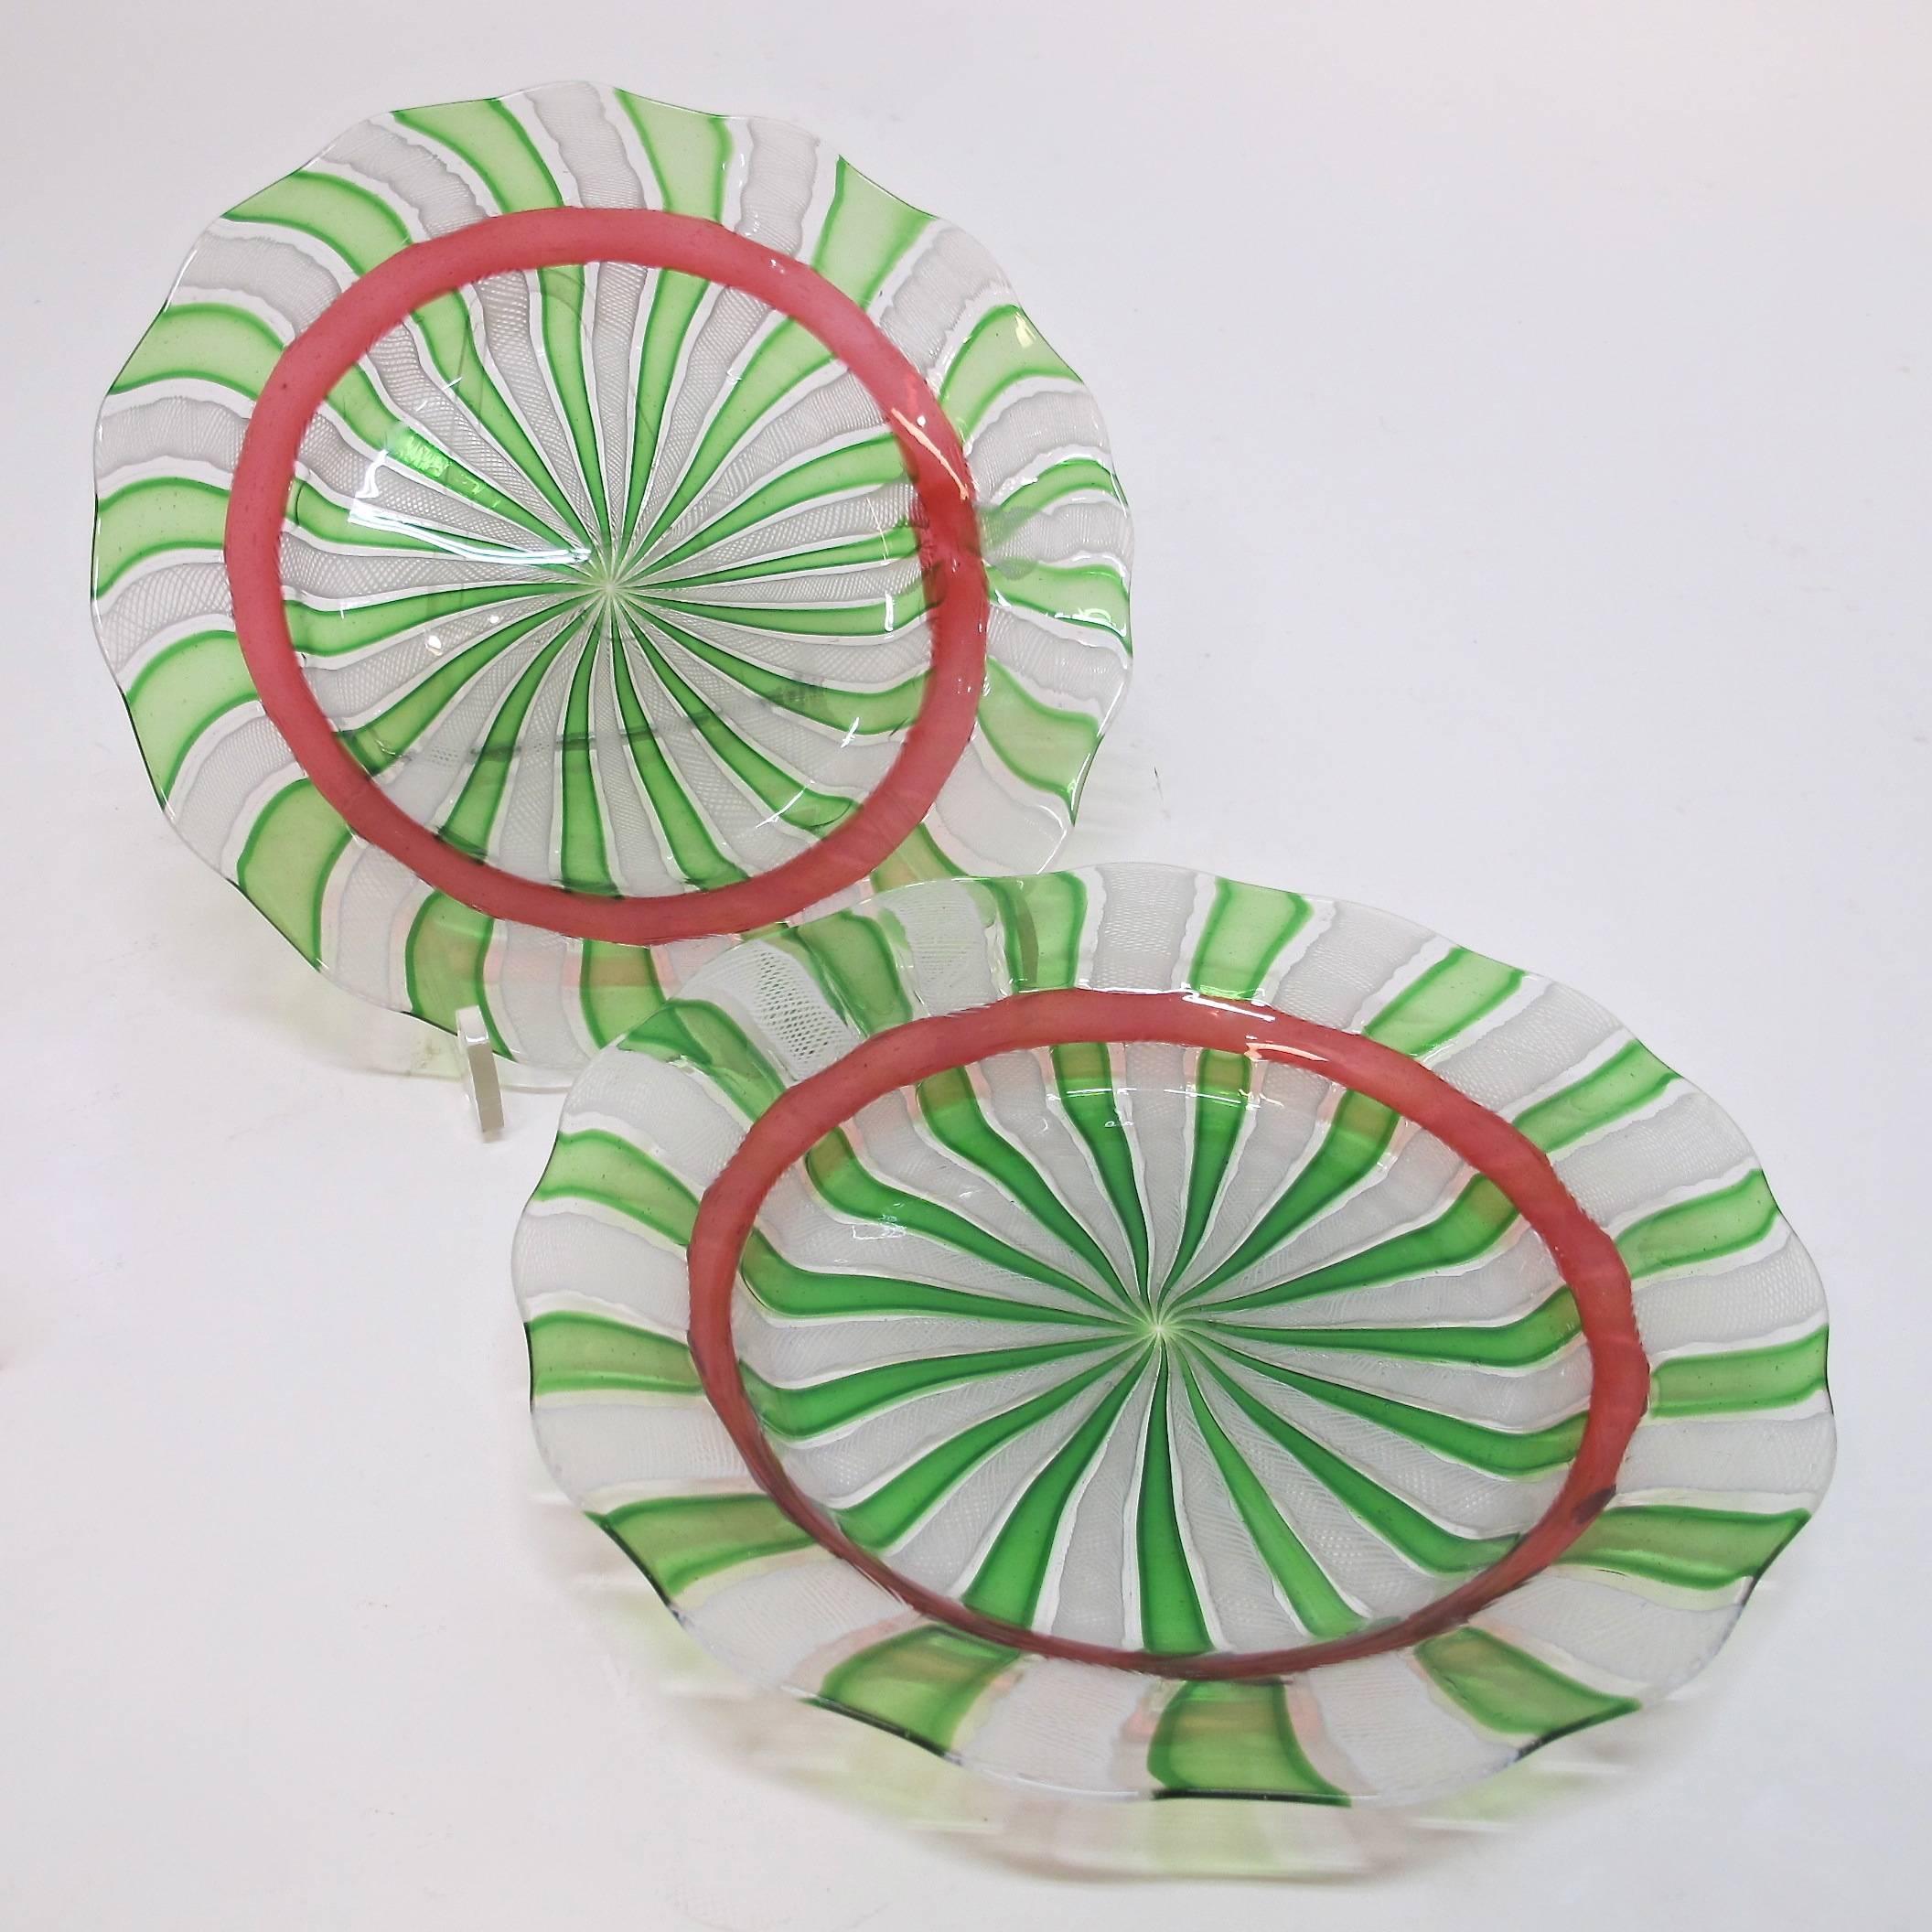 A beautiful pair of rare mid-20th century Venetian blown glass luncheon or display plates (possibly Salviati).